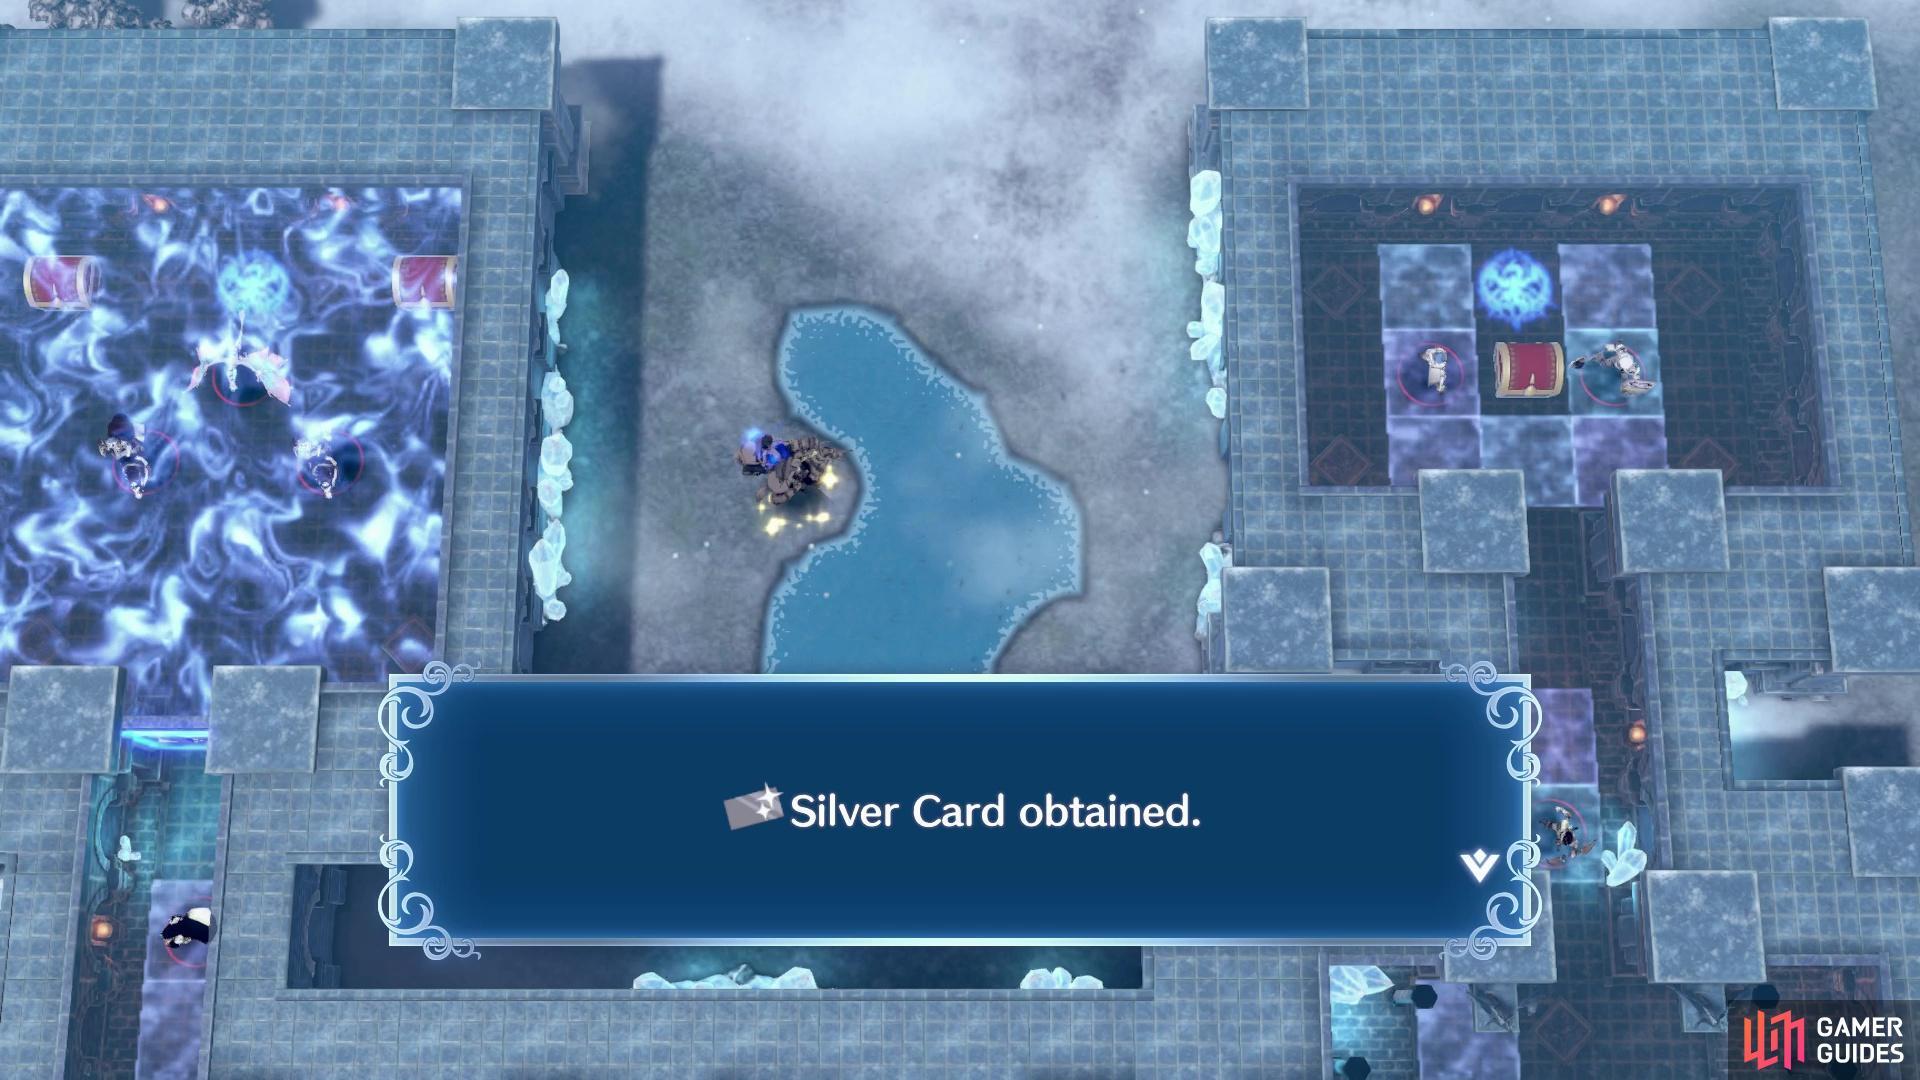 If you end a unit's turn on this tile you'll obtain the Silver Card.